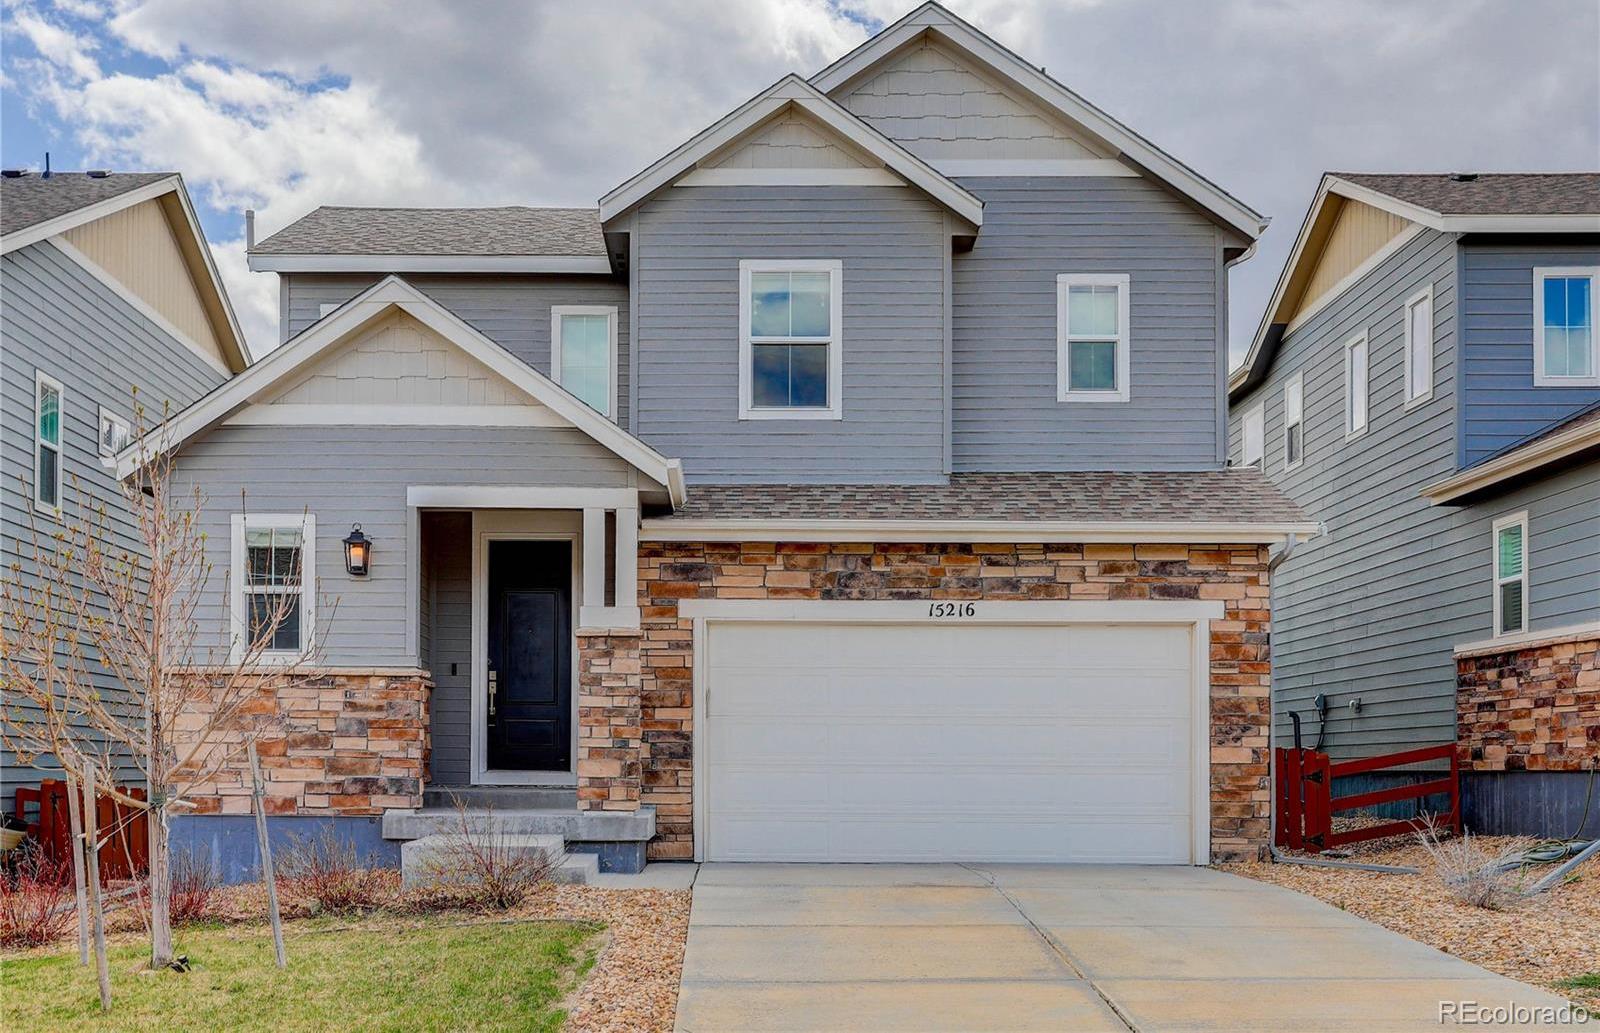 Photo one of 15216 W 93Rd Ave Arvada CO 80007 | MLS 6611371